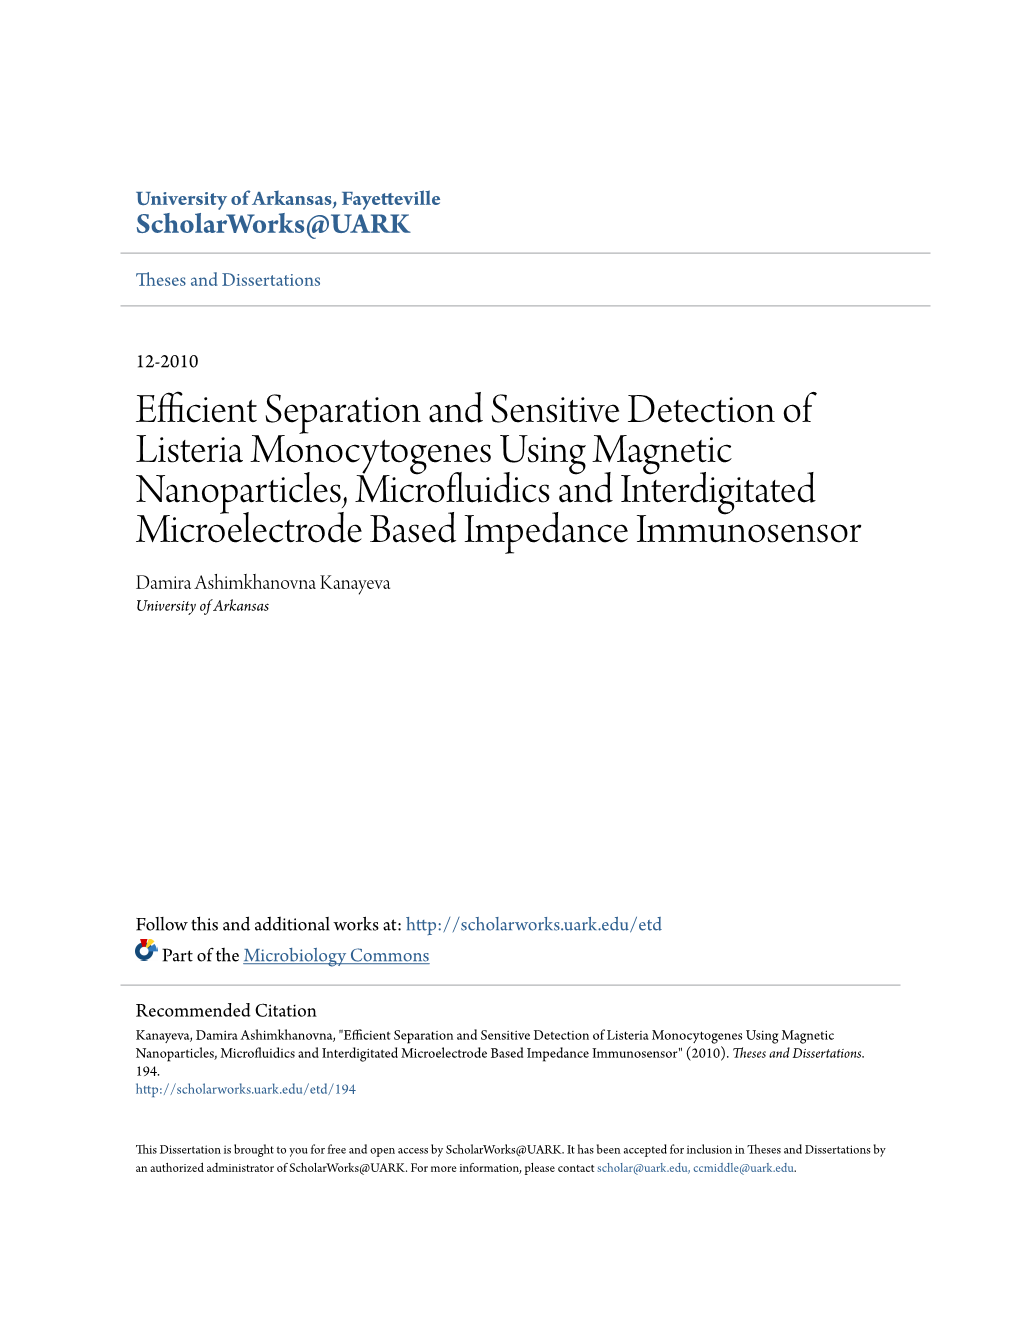 Efficient Separation and Sensitive Detection of Listeria